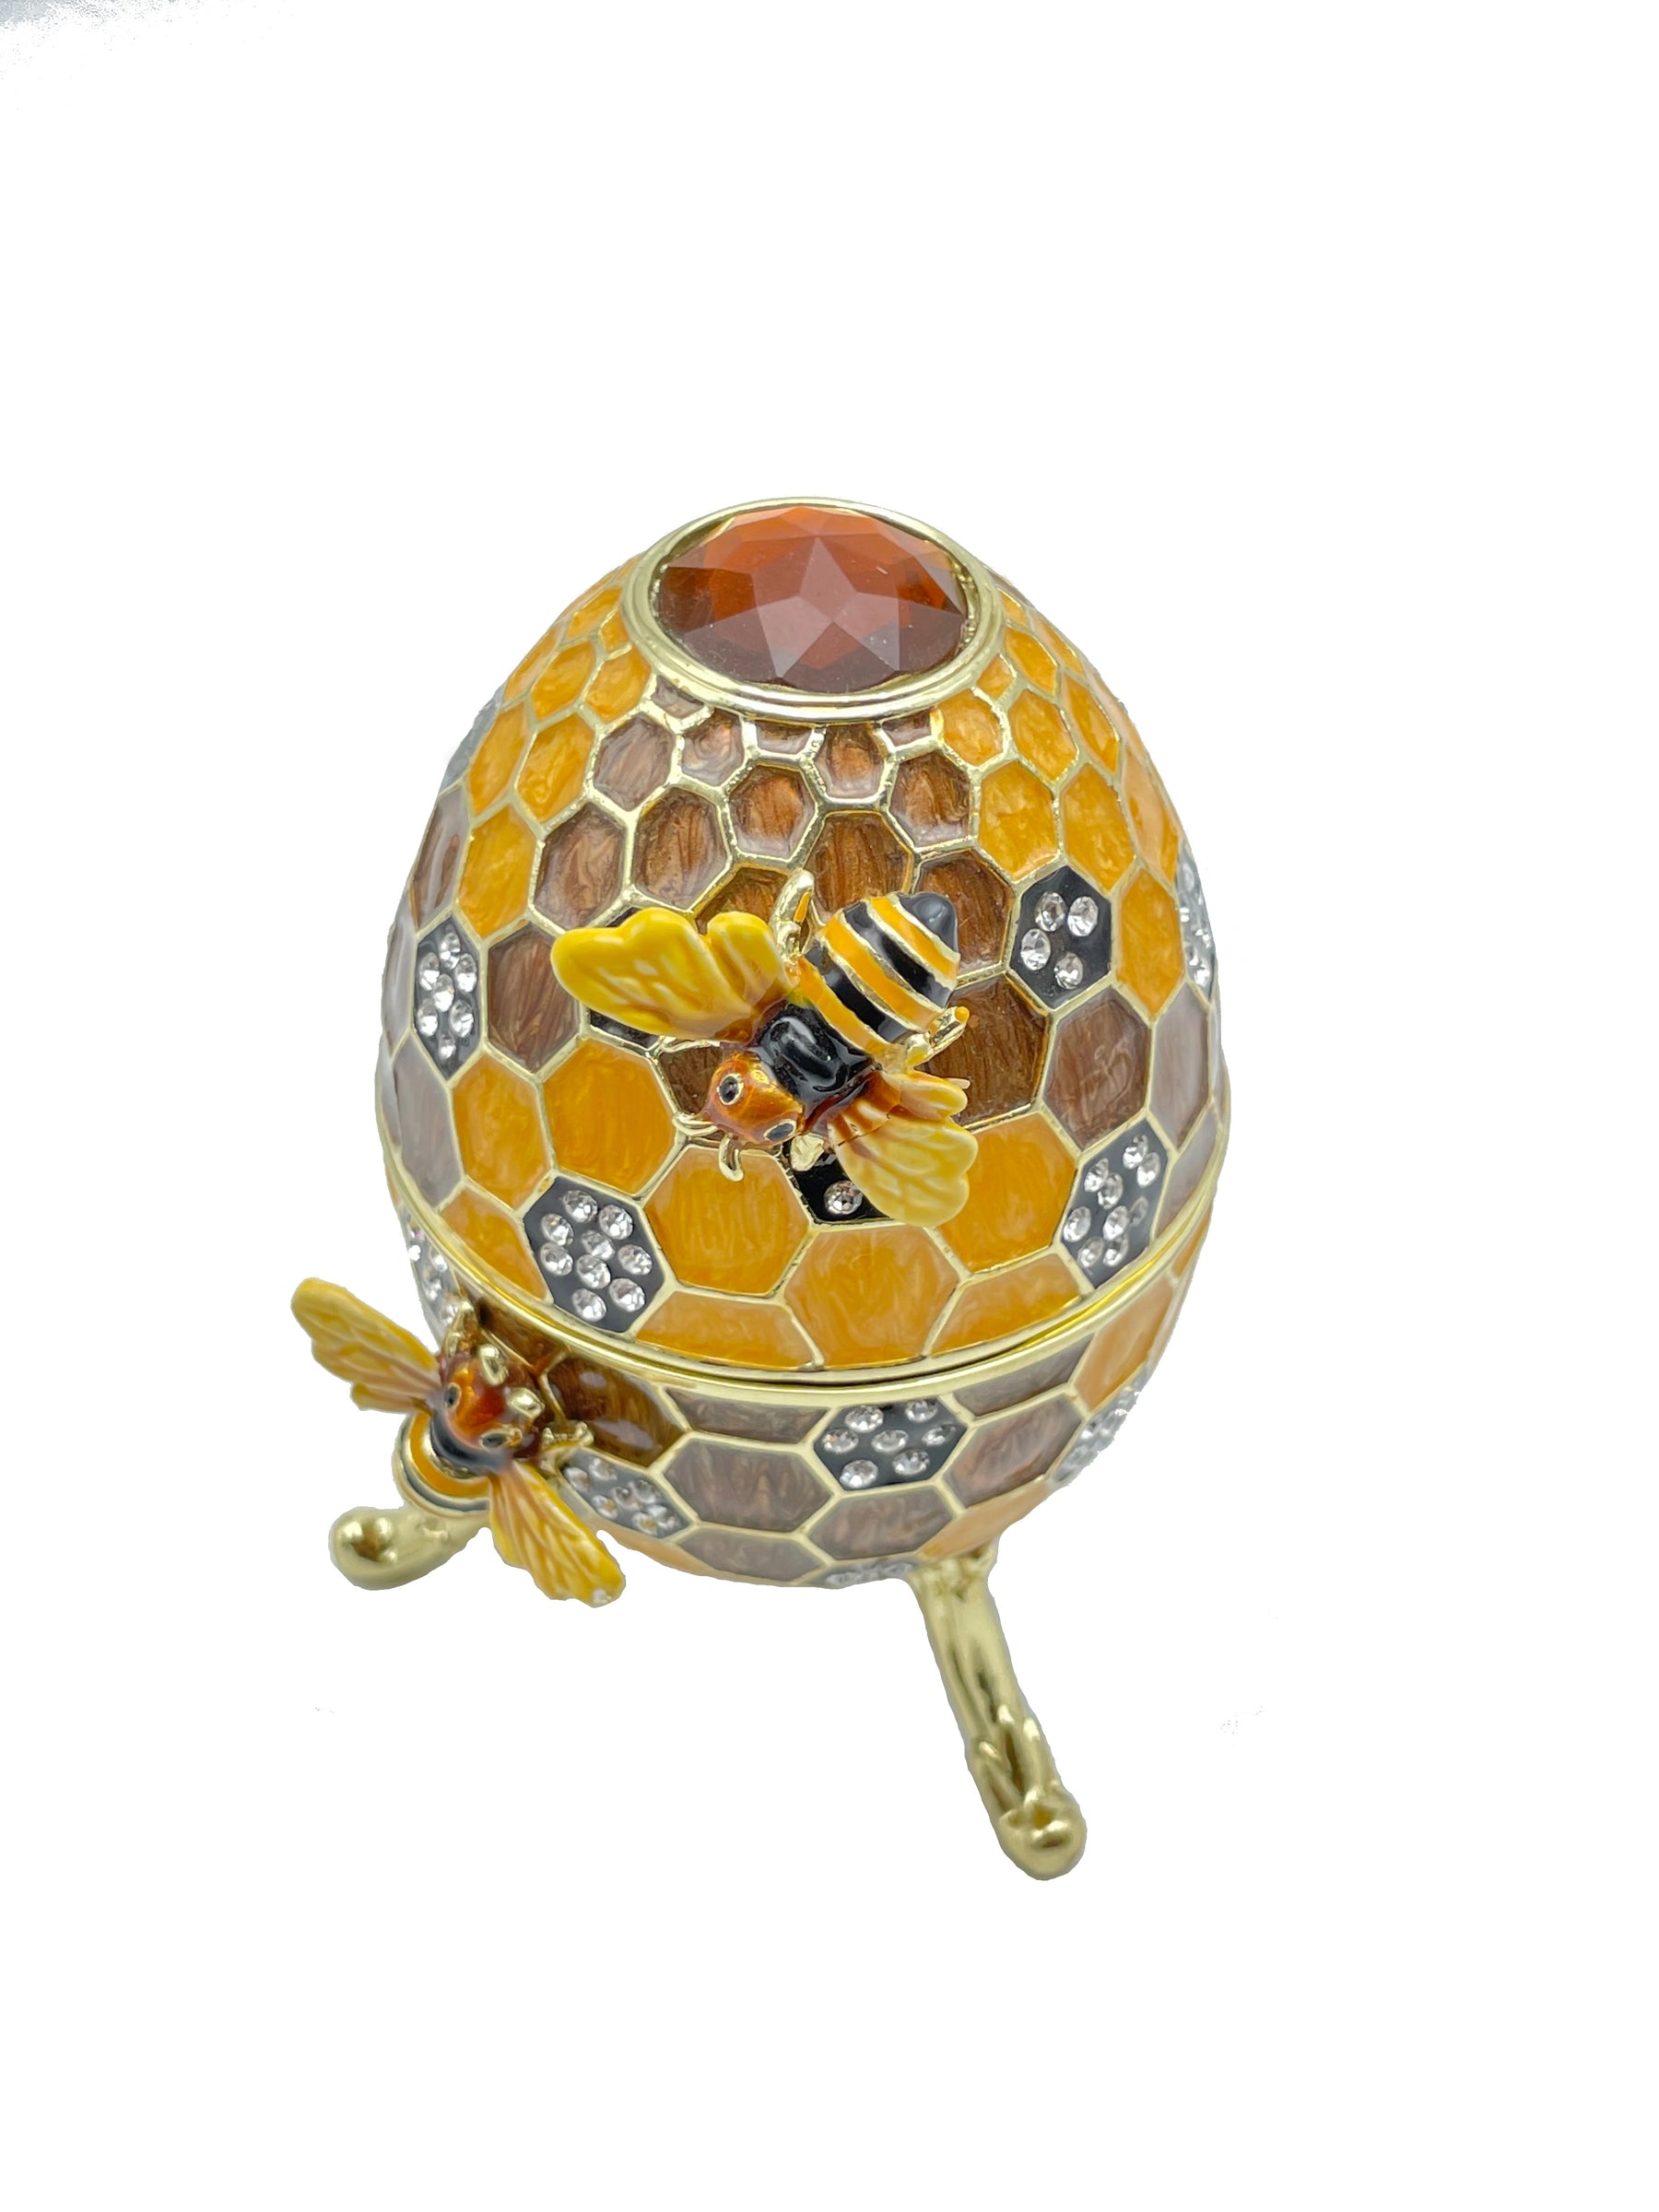 Beehive Egg with Bees